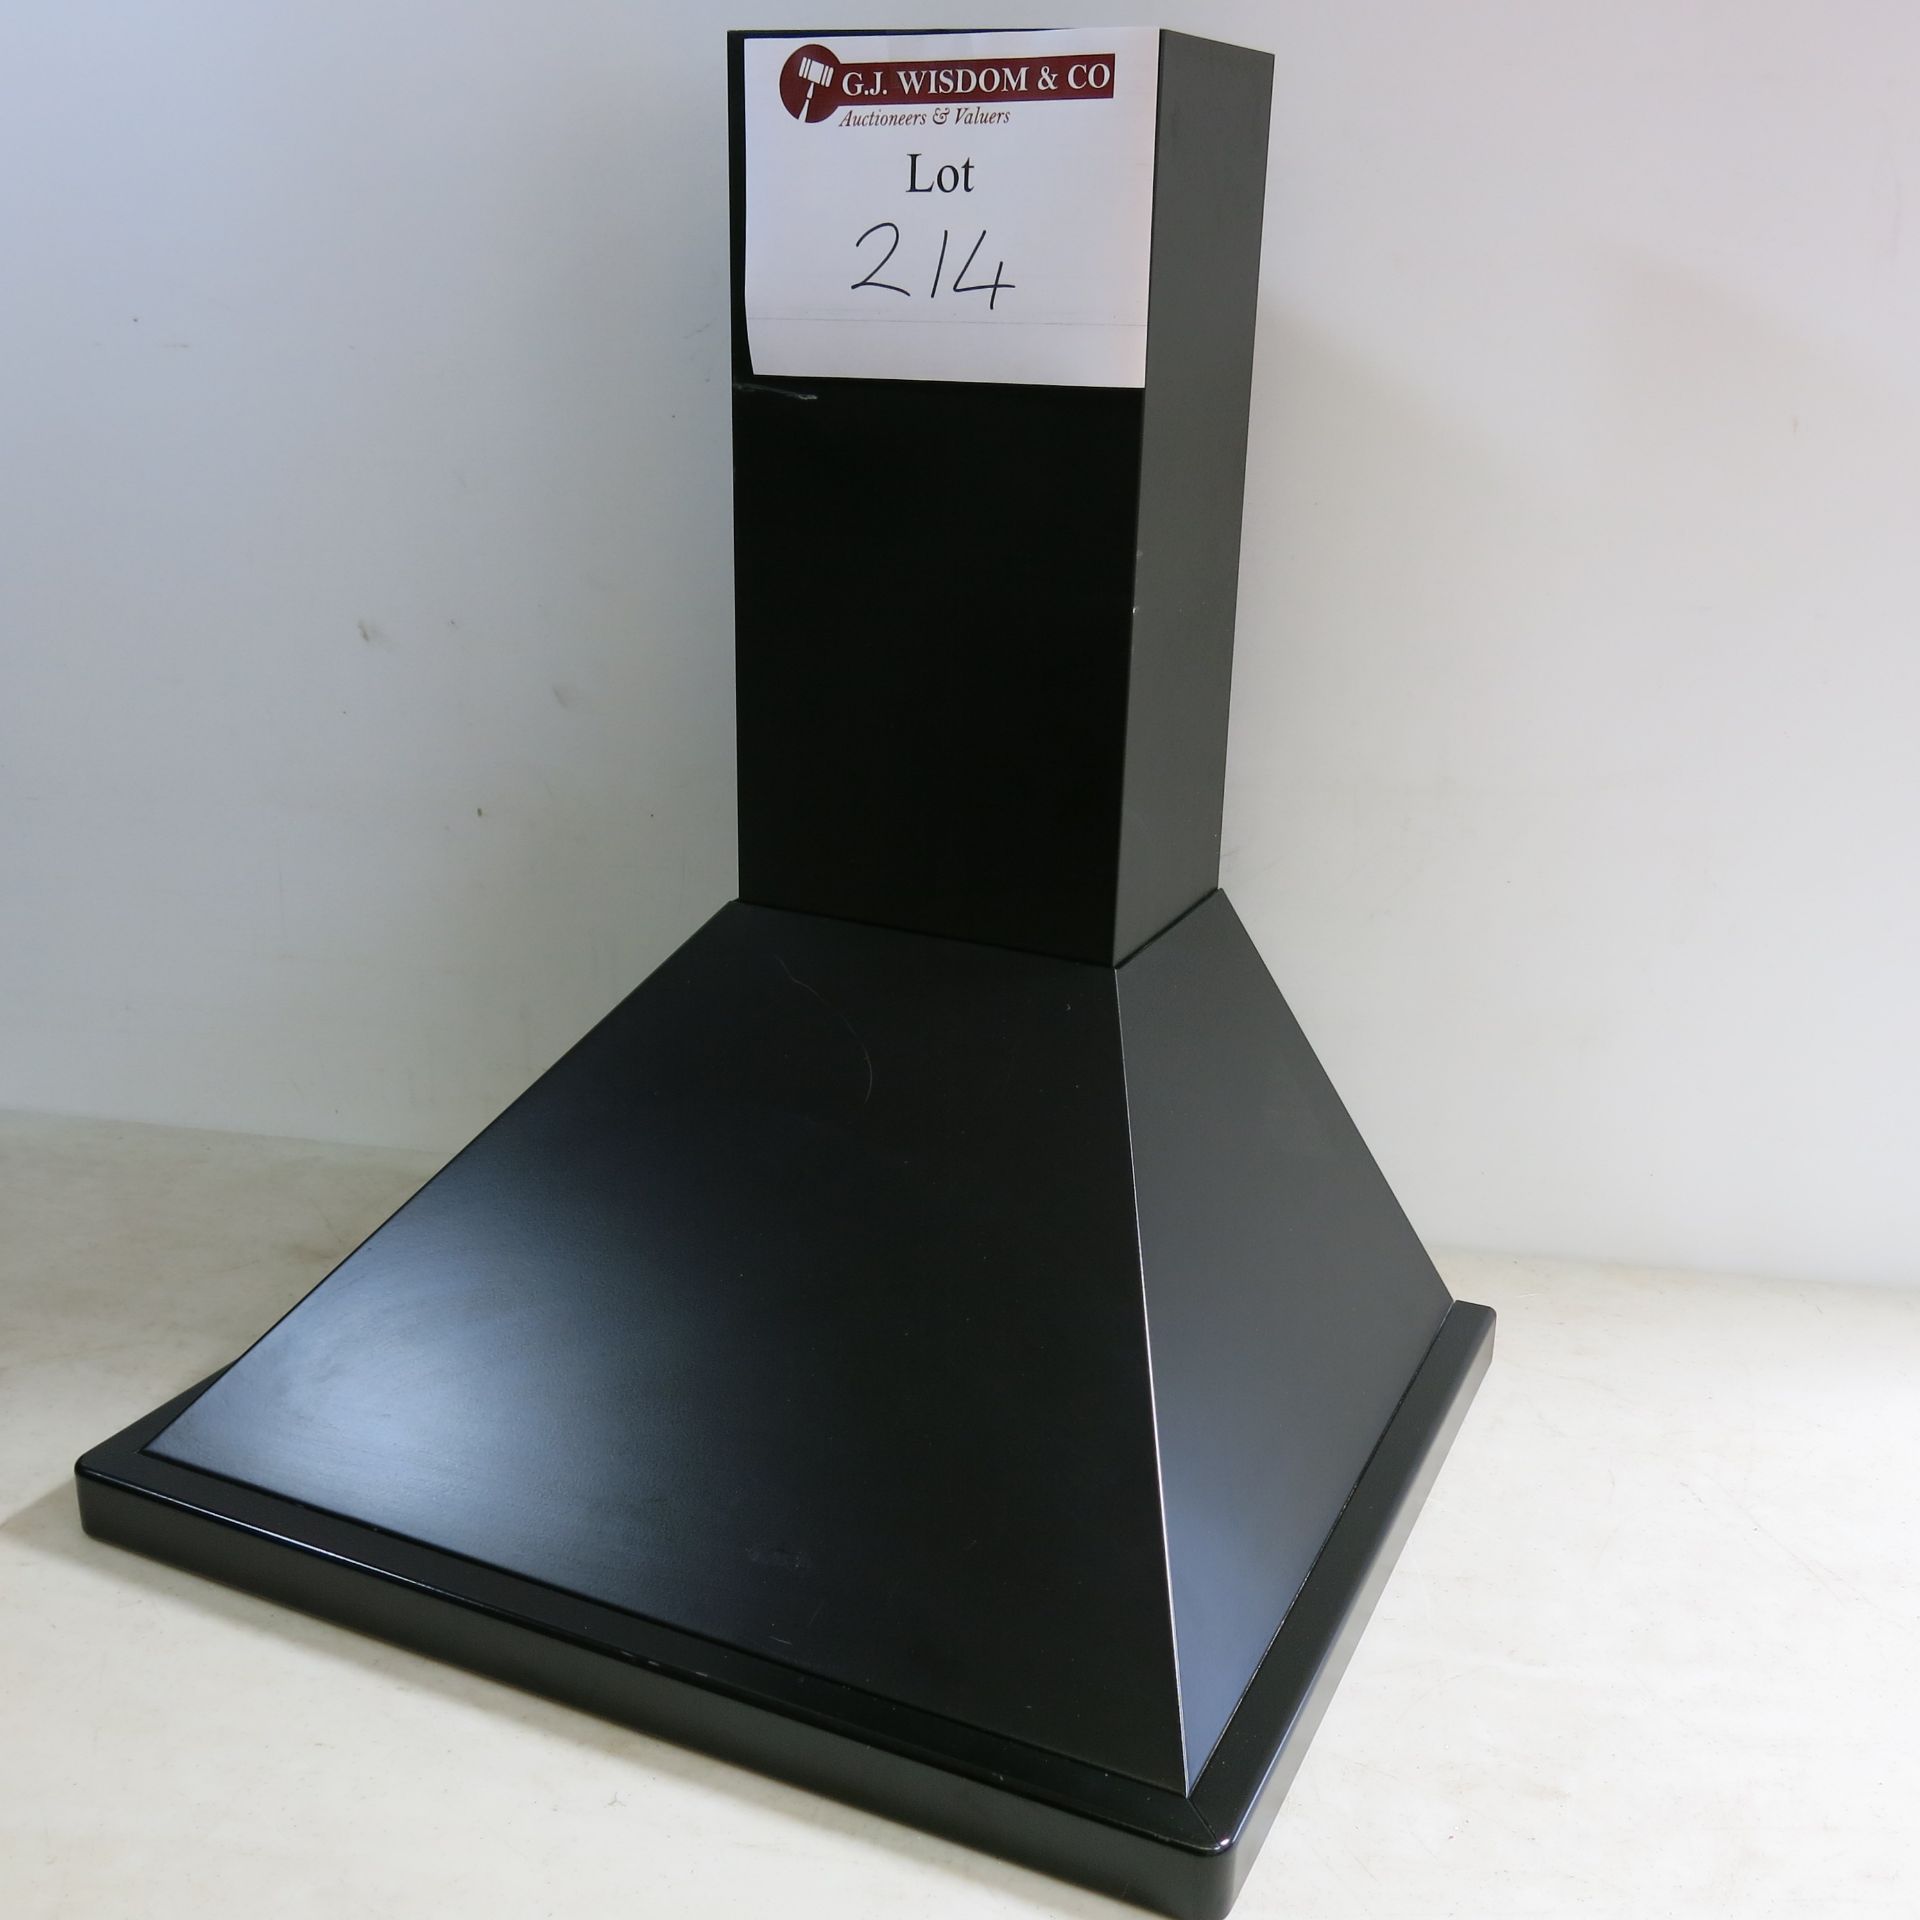 Baumatic 60cm Black Extractor Cooker Hood, Model FCC/2002. Damage to Filters, Ex Display/As Viewed.